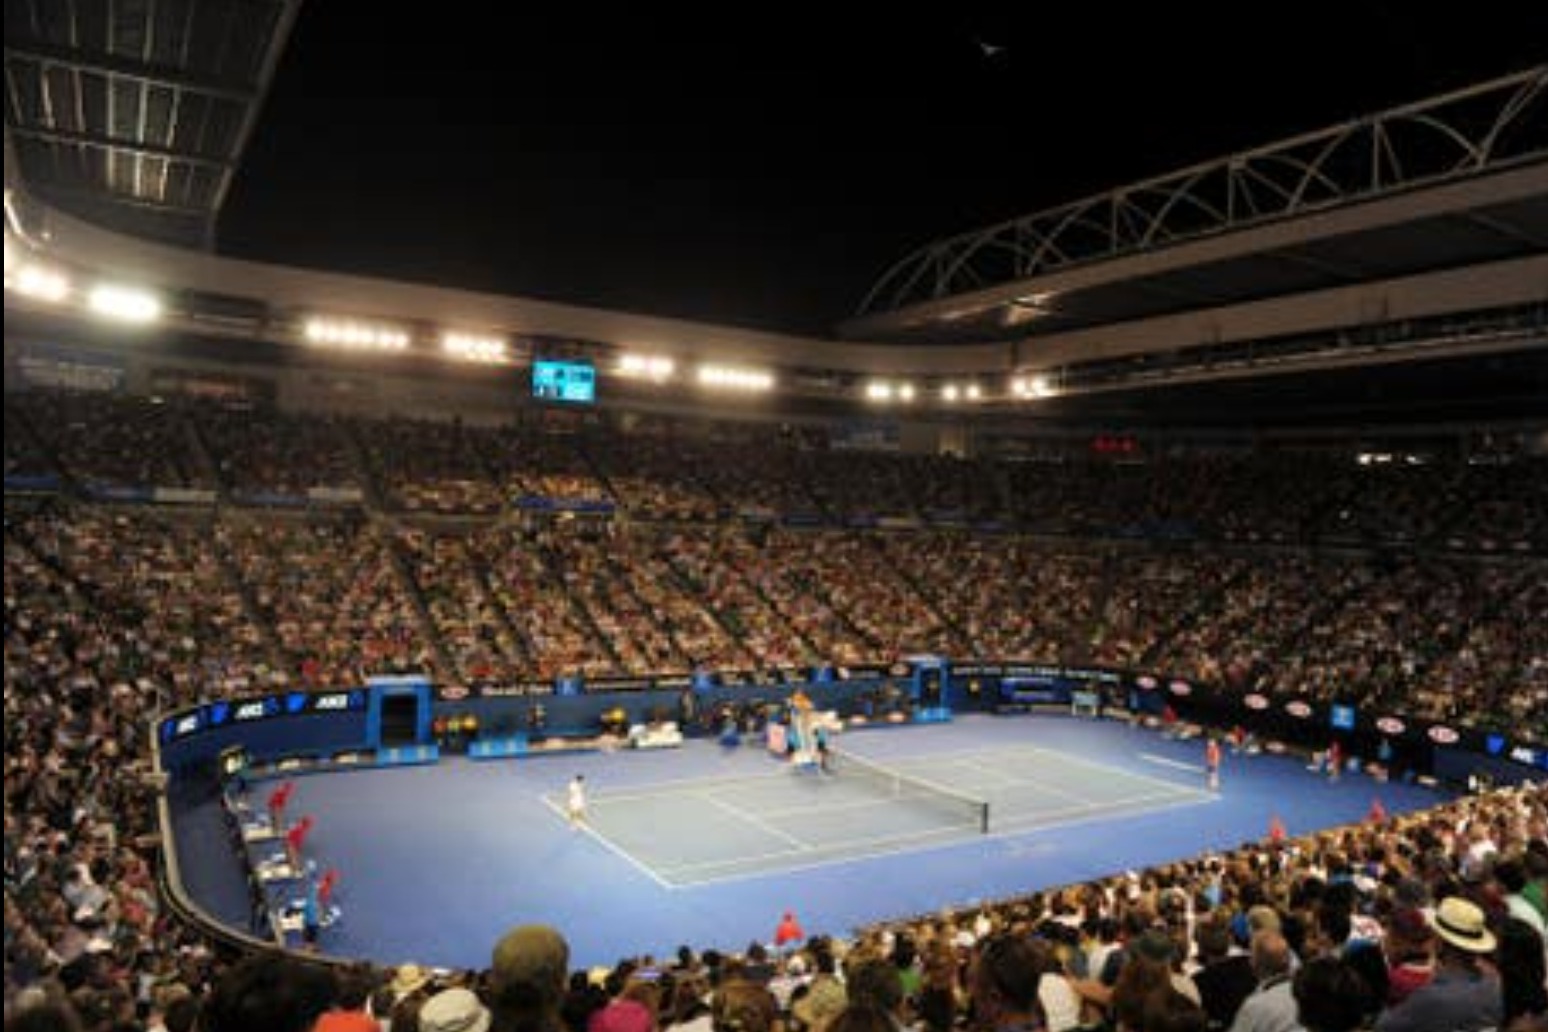 Australian Open to admit crowds of up to 30,000 spectators 